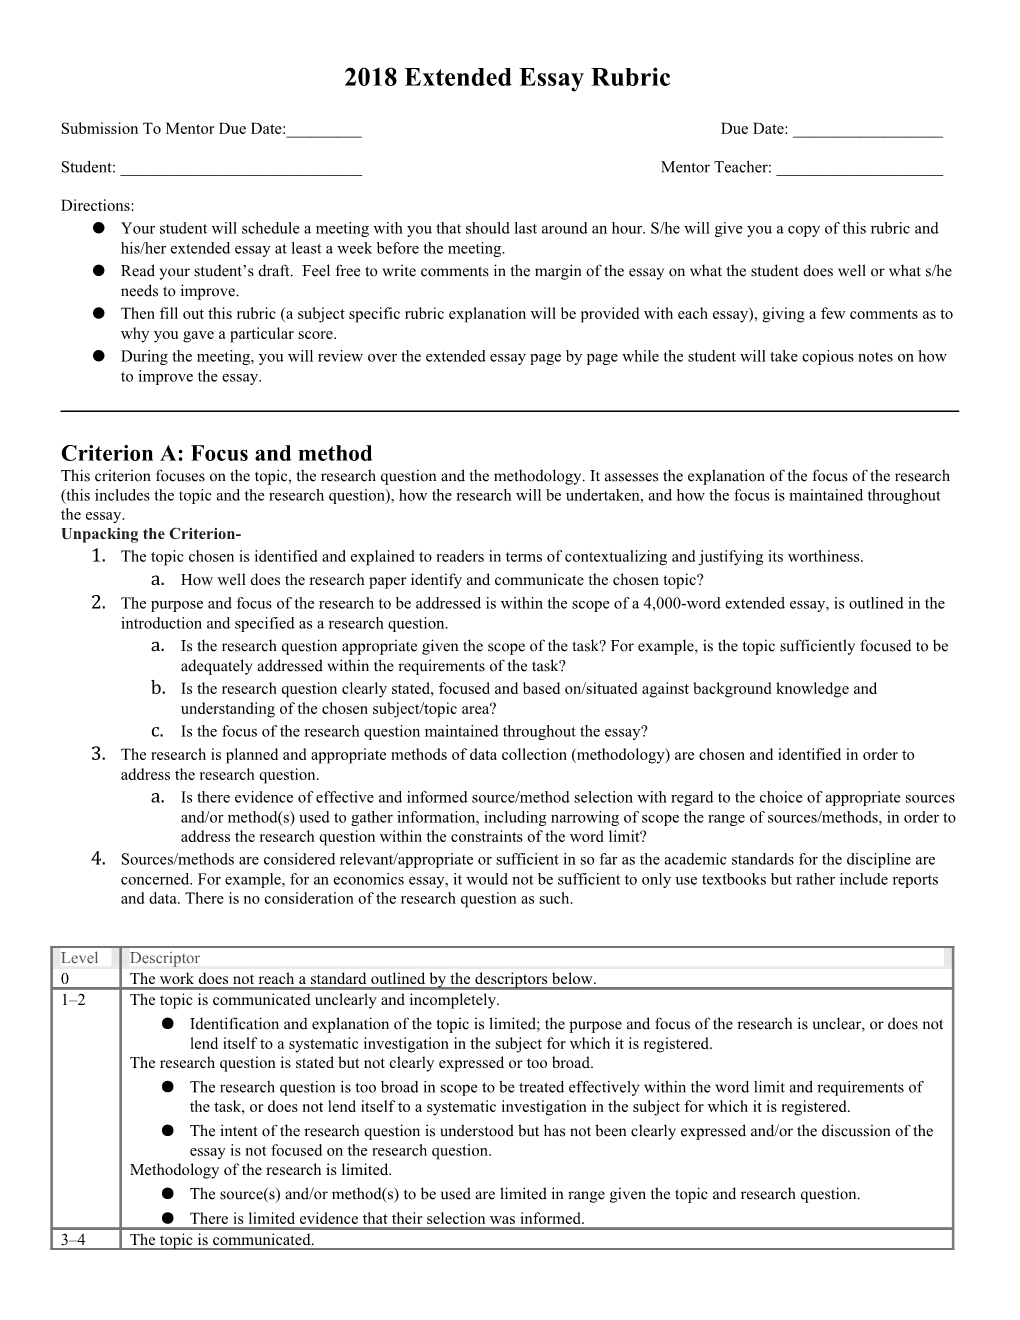 2018 Extended Essay Rubric